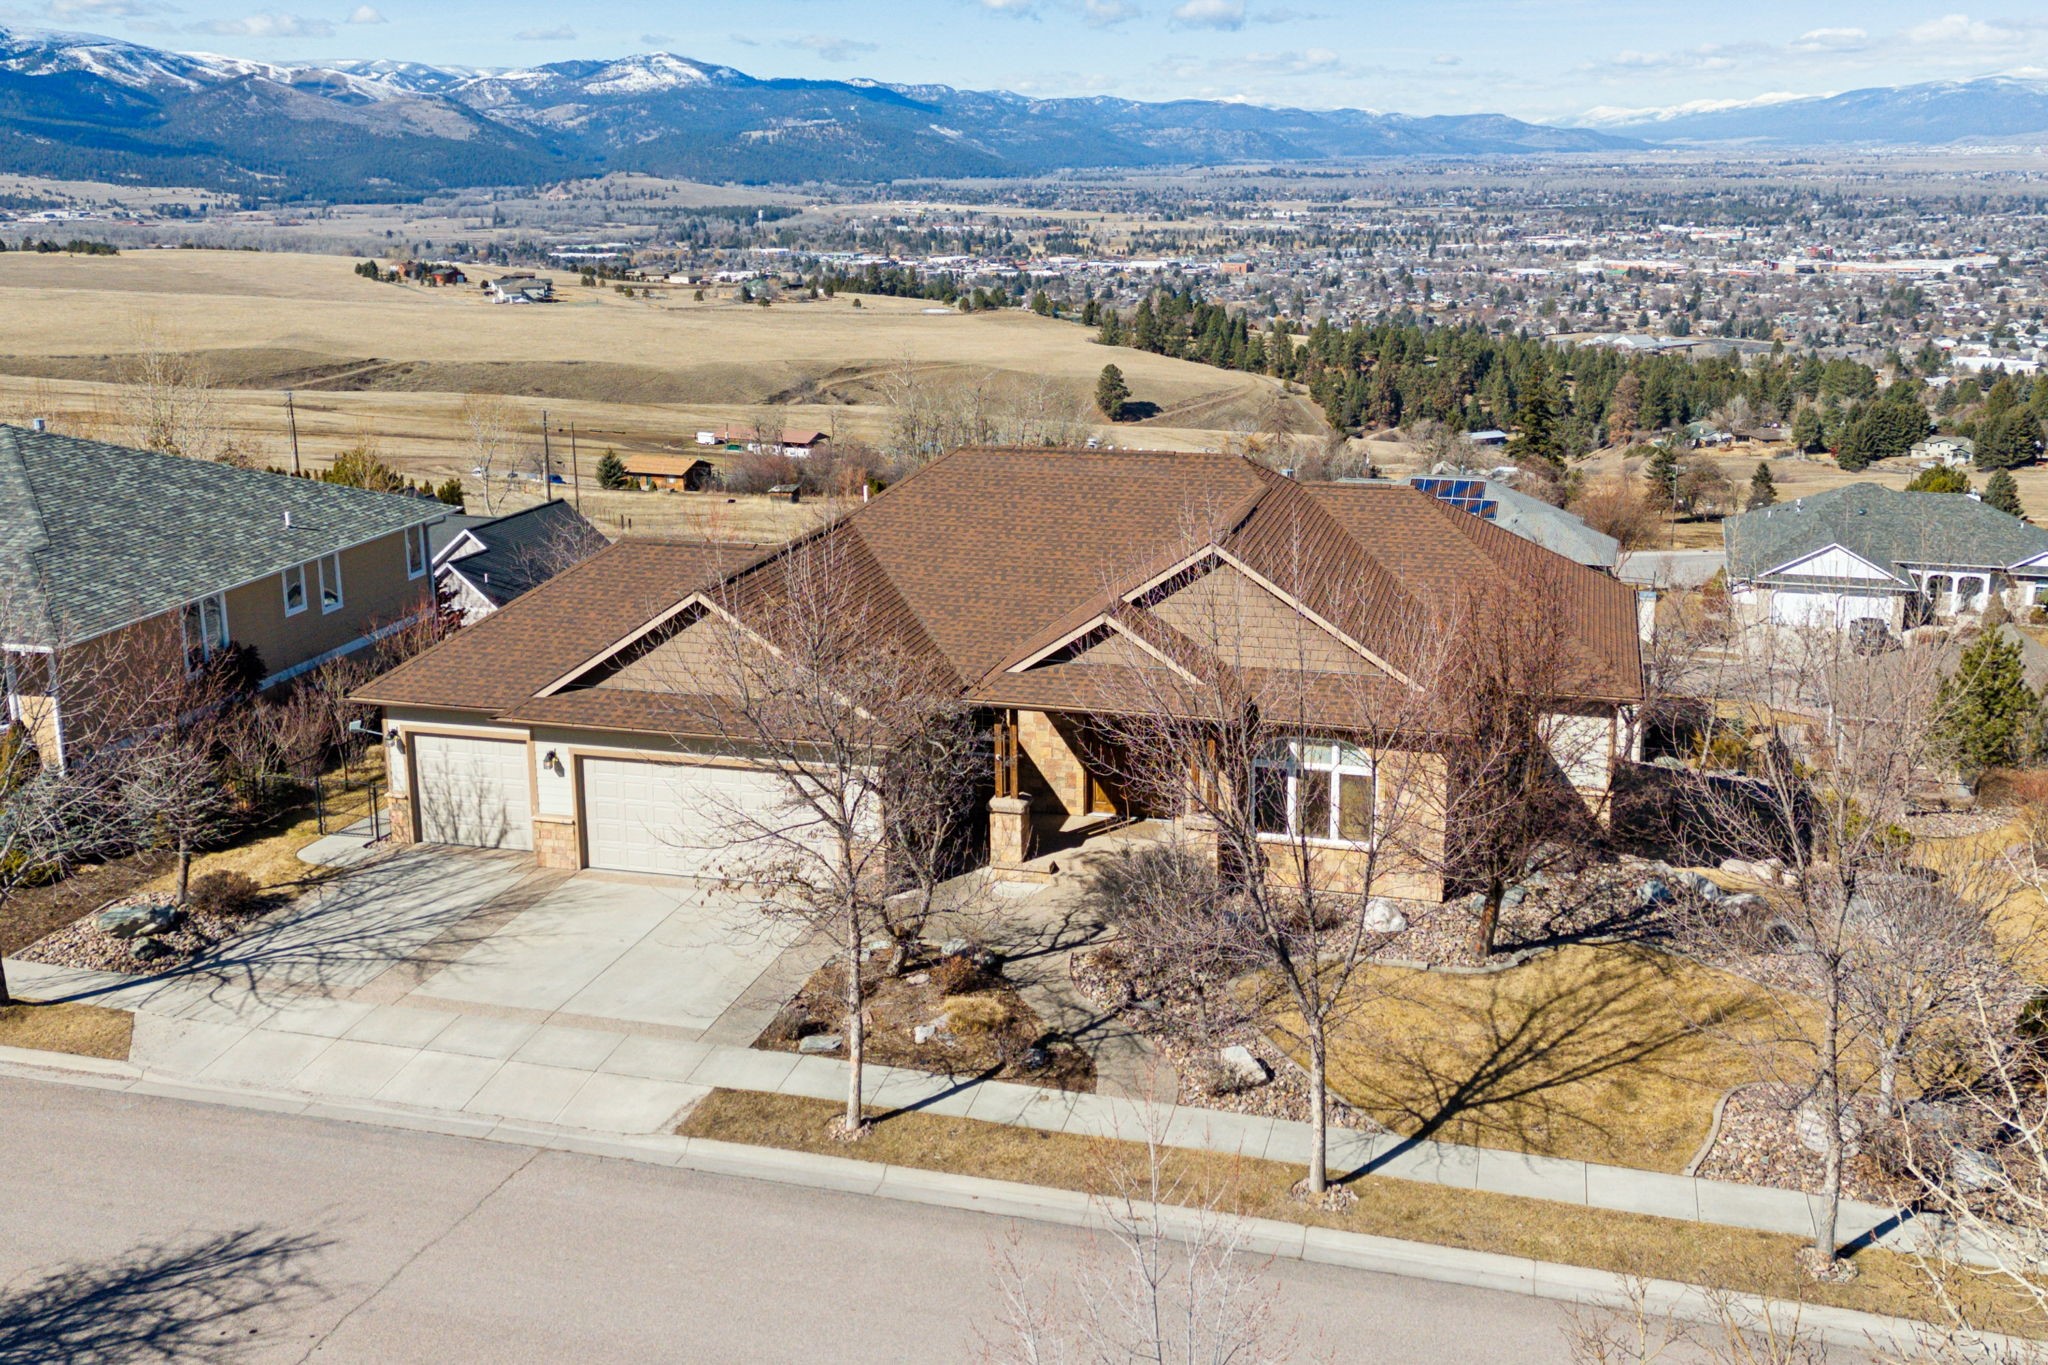 Experience a true luxury build in Mansion Heights, and the best views in Missoula. The main floor of 221 Mansion Heights Drive features a chef’s kitchen and dining space that overlooks the city. The stepped-down living room is perfect for socializing; or move the party outdoors to the sprawling wraparound deck. There are two main floor bedrooms; the owner's suite features a separate mini-split A/C for warm summer nights, a walk-in closet, and en-suite bathroom with radiant heated tile floors and a steam room. A spiral staircase leads you to the lower level, featuring an entertainment room with wet bar and an adjoining theater with (blackout curtains and audio system in place); two additional bedrooms, one currently converted into a home gym; and craft room with built-in peg boards. Beautifully landscaped yard and concrete patio on the lower level round-out the fine finishes in this luxury home. Lower level has been upgraded with brand new LVP flooring. The owners spared no expense on the internal systems of the home. Dual furnaces, dual water heaters, central A/C, mini-split A/C, central vacuum and leased water softener. Home is wired throughout with speakers (sound system/equipment included in sale). The three car garage also comes with built-in storage cabinets. Schedule a showing today. Call Warren Altounian at 406 550-2065, or your real estate professional.